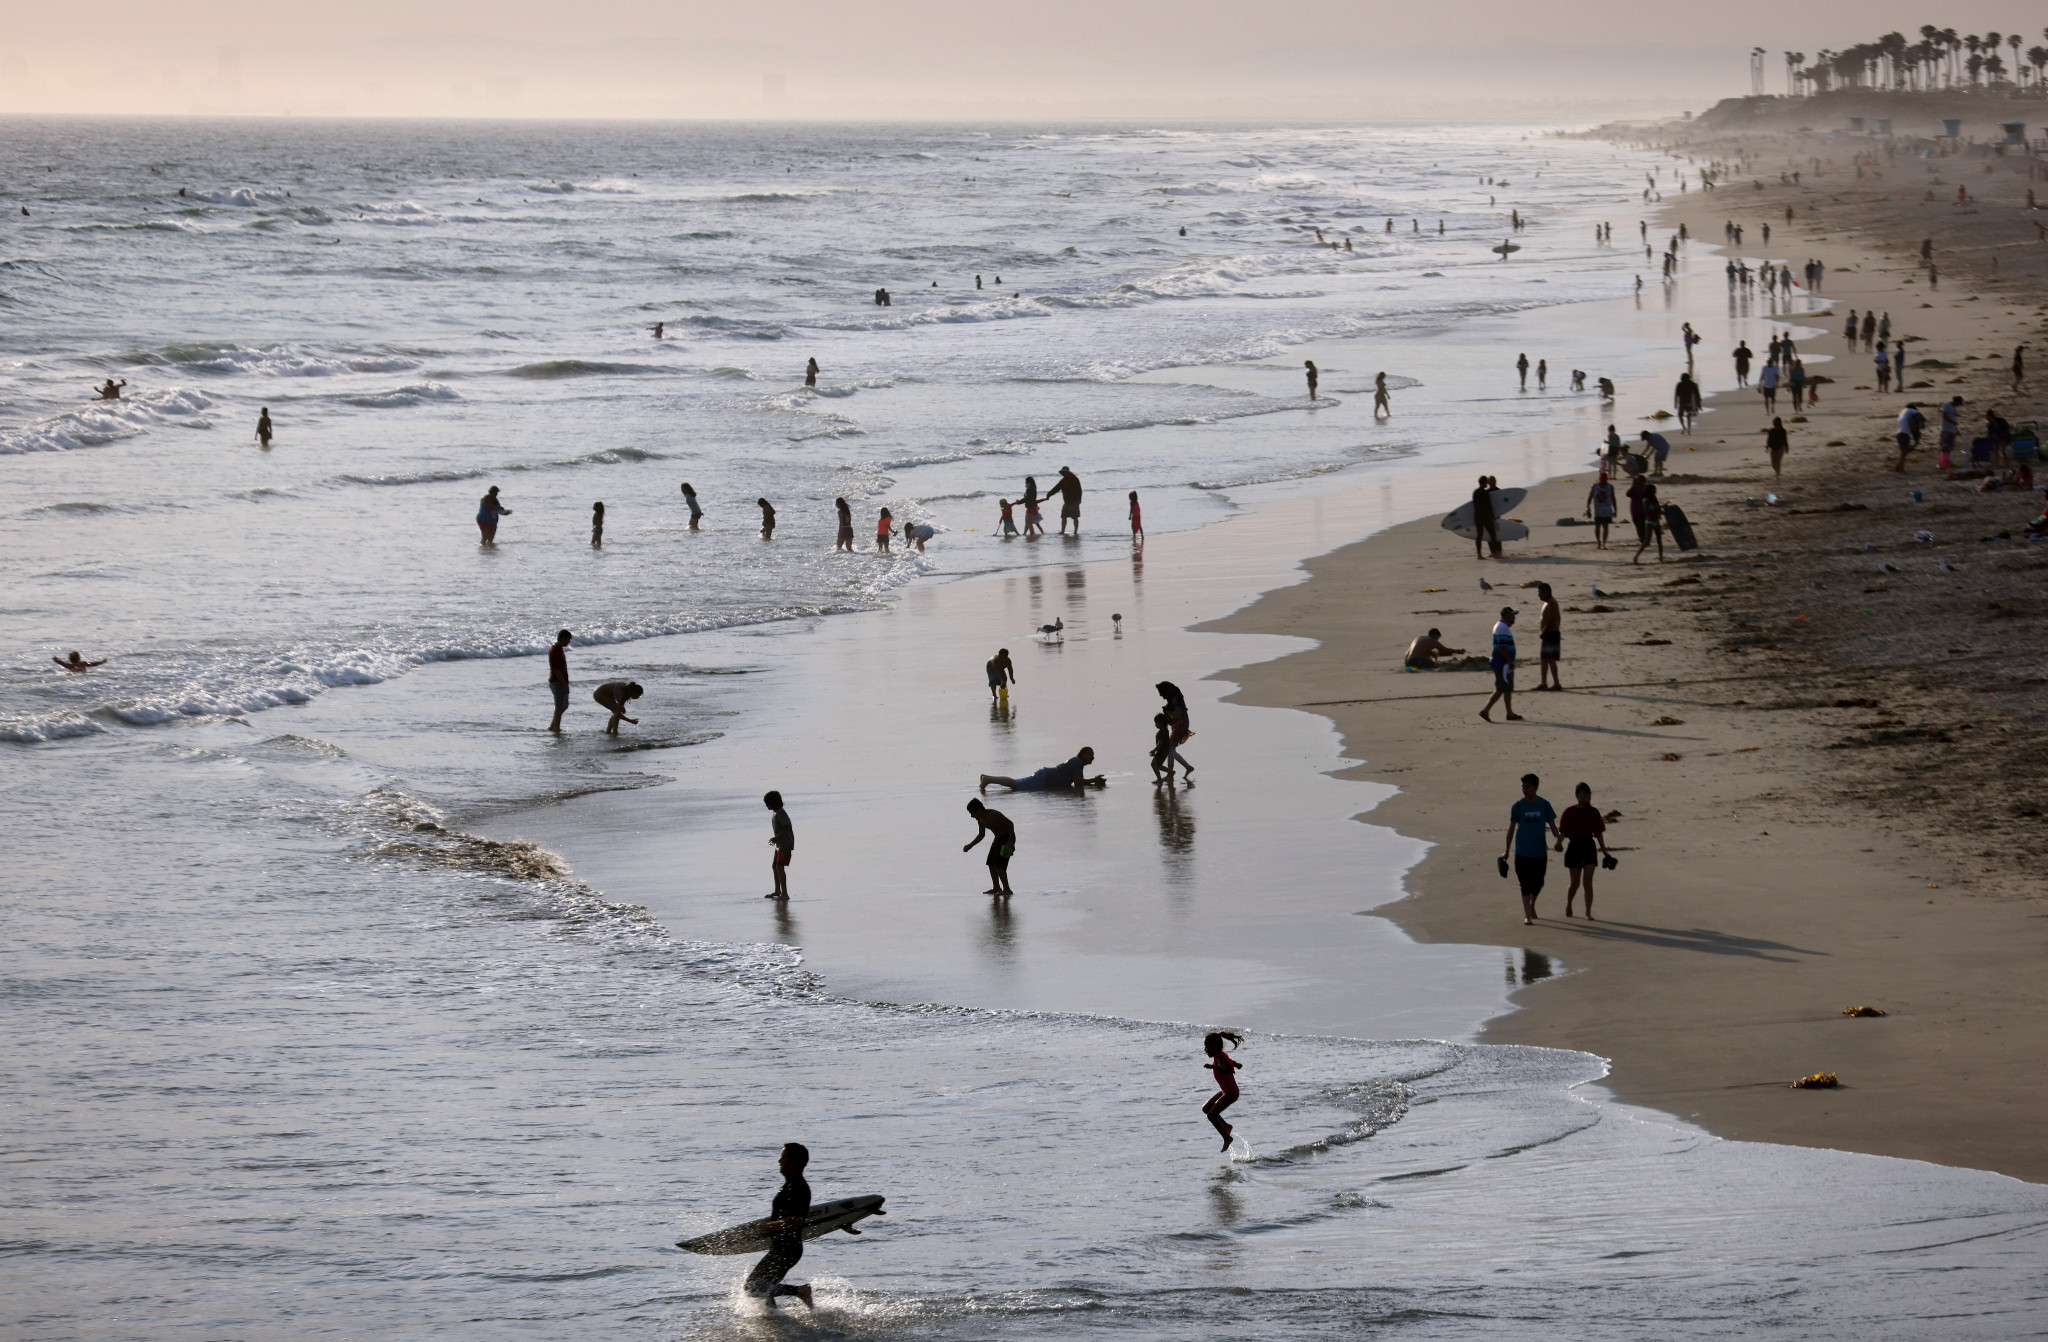 Huntington Beach passes resolution to seek to host surfing, skateboarding and BMX events at Los Angeles 2028